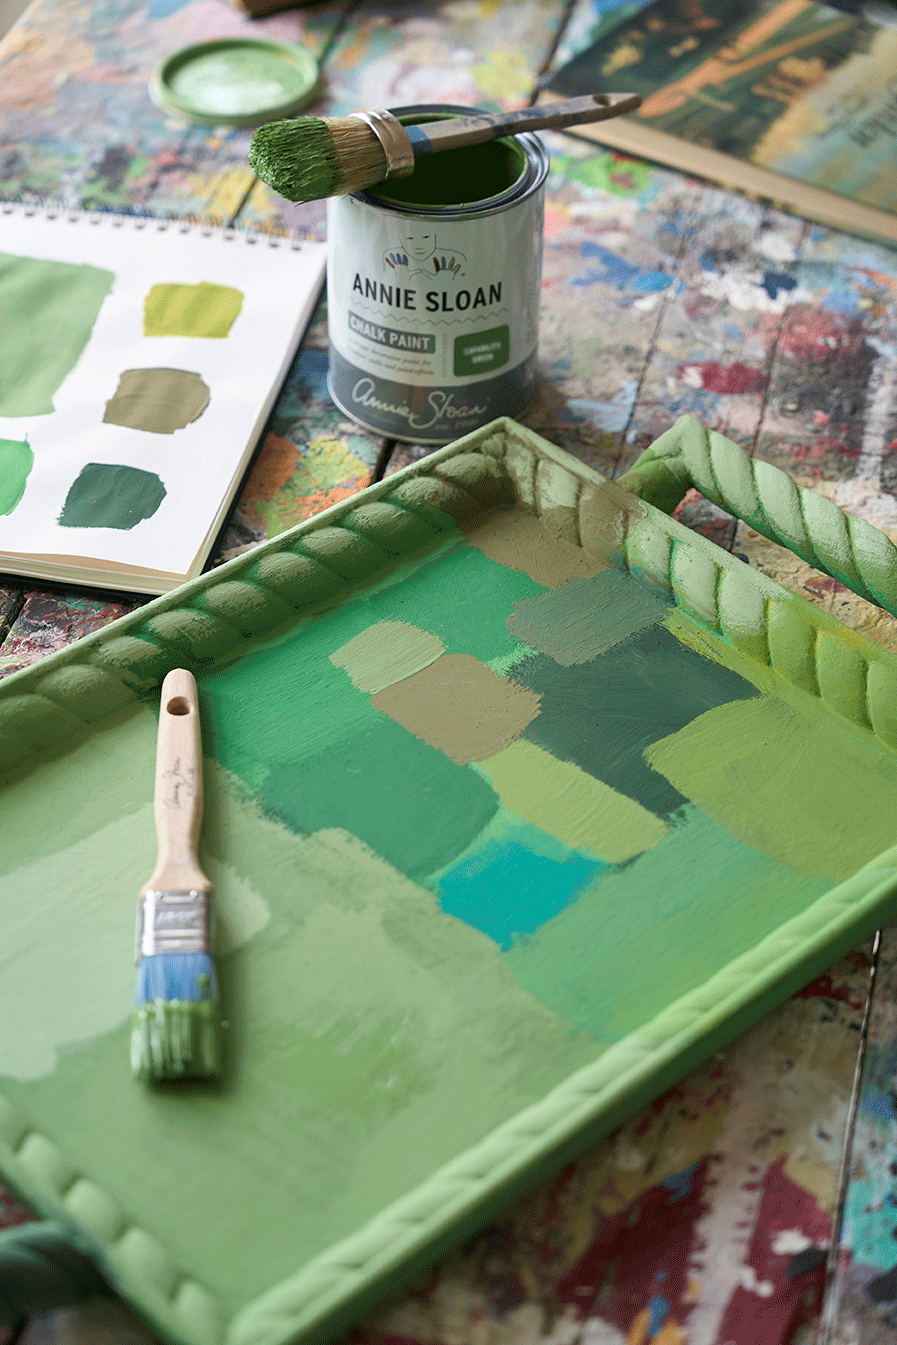 Capability Green Chalk Paint used on a wooden tray